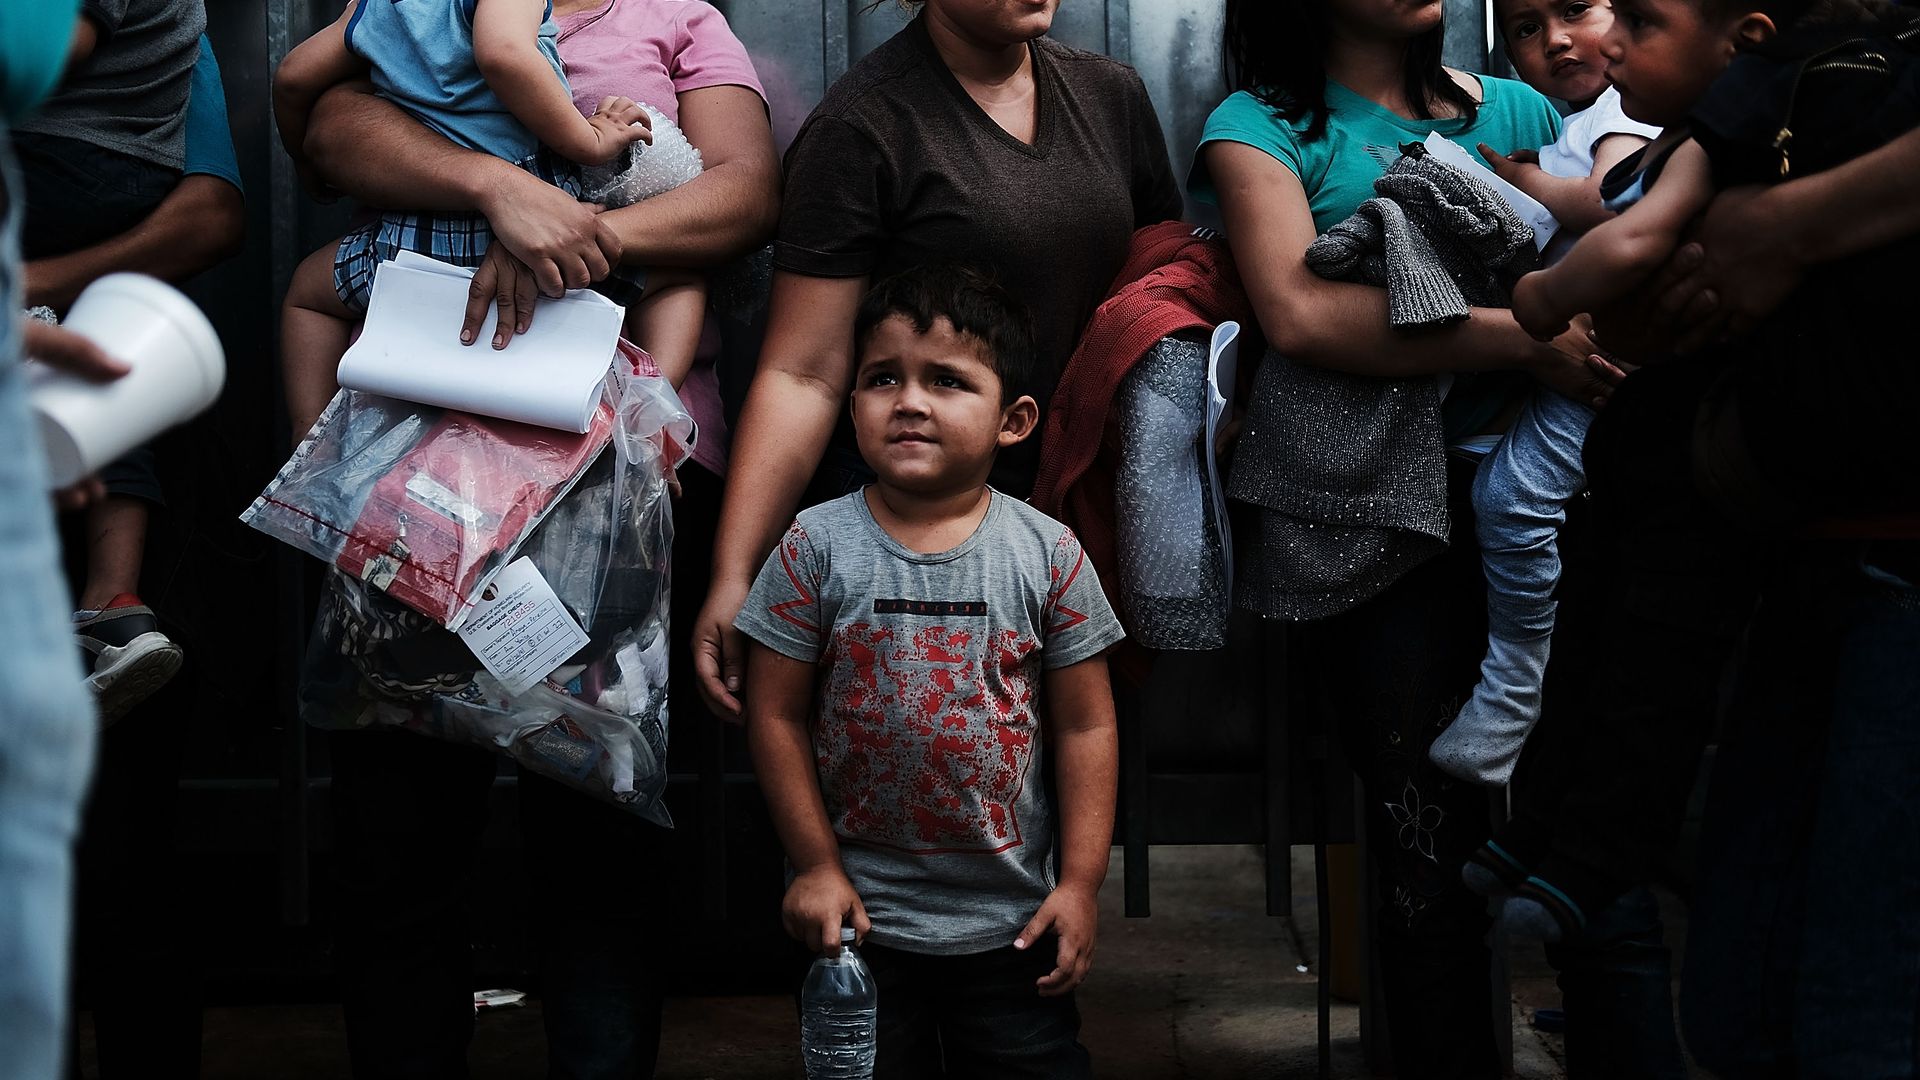 Dozens of women and their children, many fleeing poverty and violence in Honduras, Guatamala and El Salvador, arrive at a bus station following release from Customs and Border Protection in Texas.